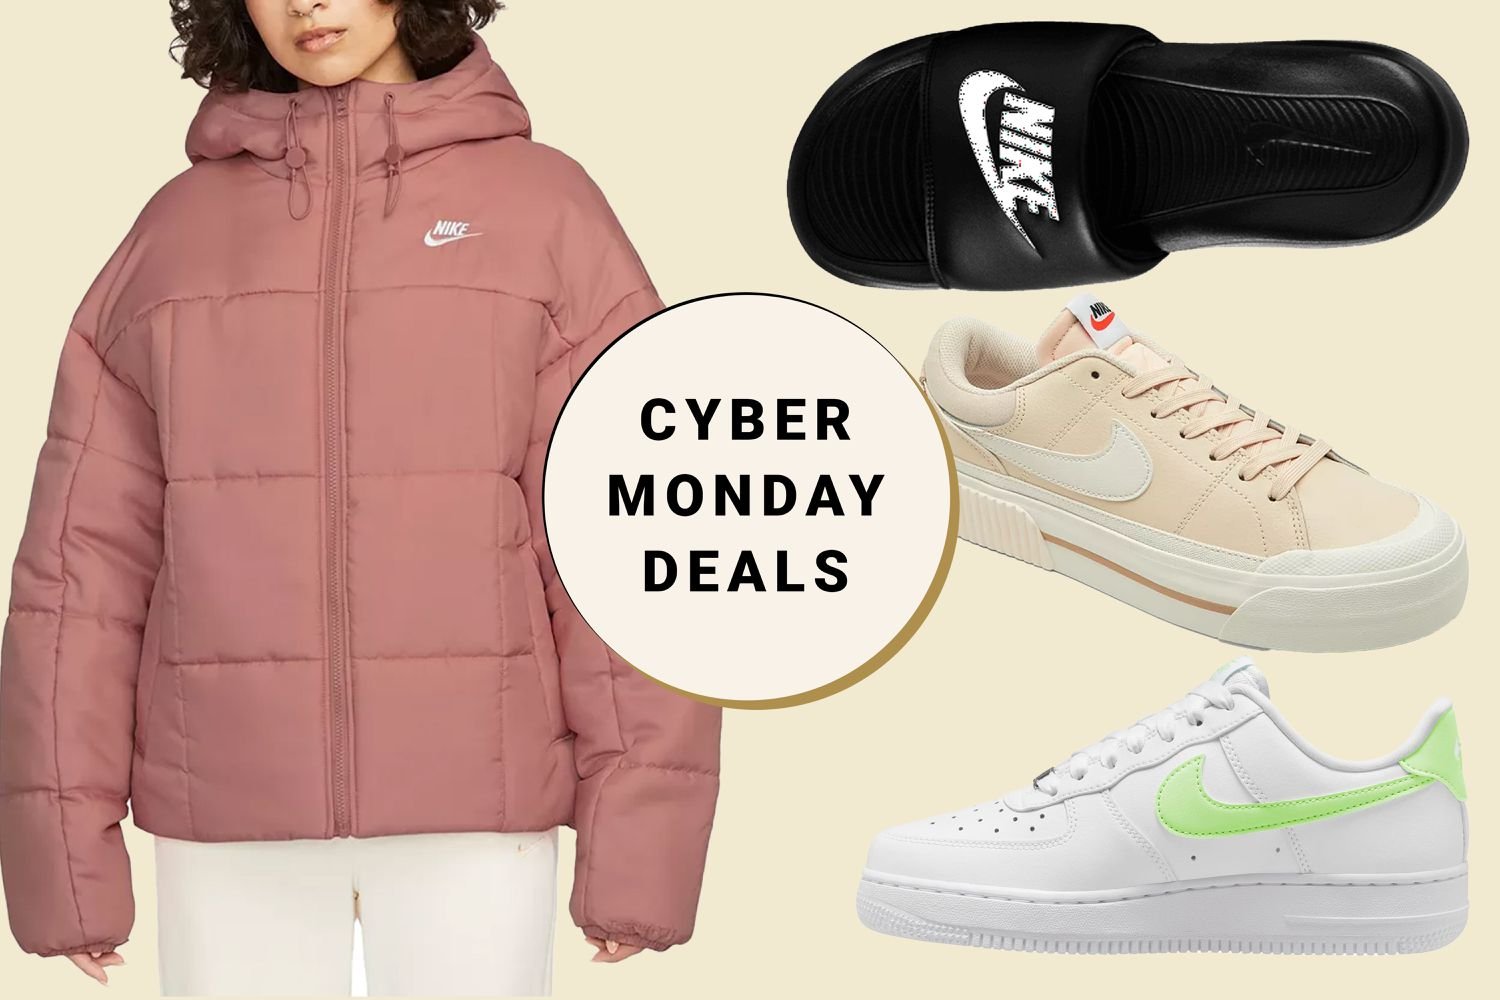 Nike Cyber Monday Deals Just Went Live — Get Comfy Sneakers, Sweatpants, and More Starting at $28